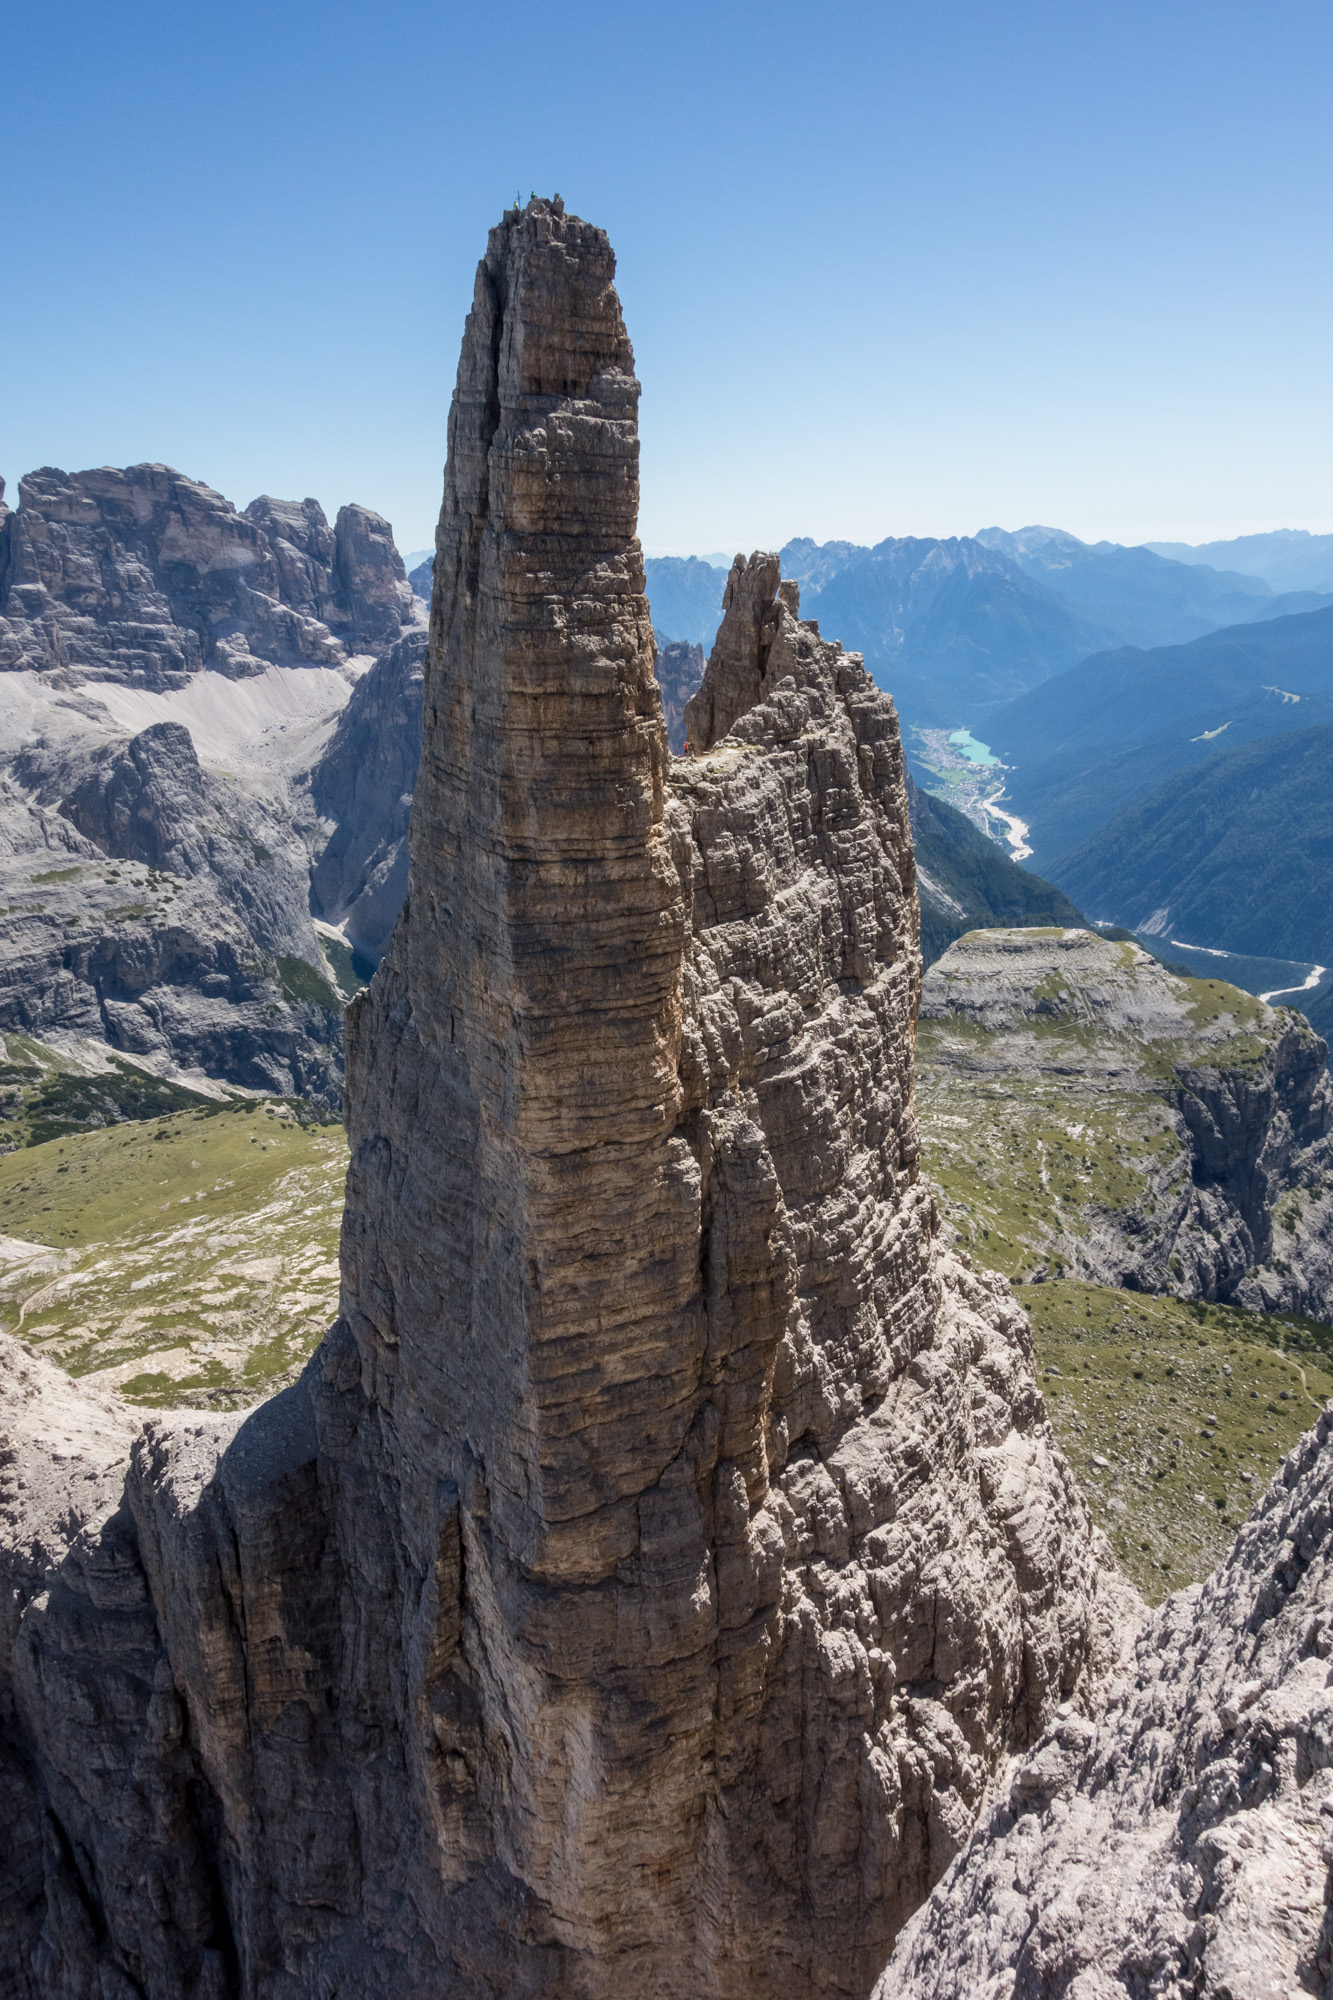 A different perspective on Cima Piccola from higher on the Dibona, with climbers just visible on the summit 